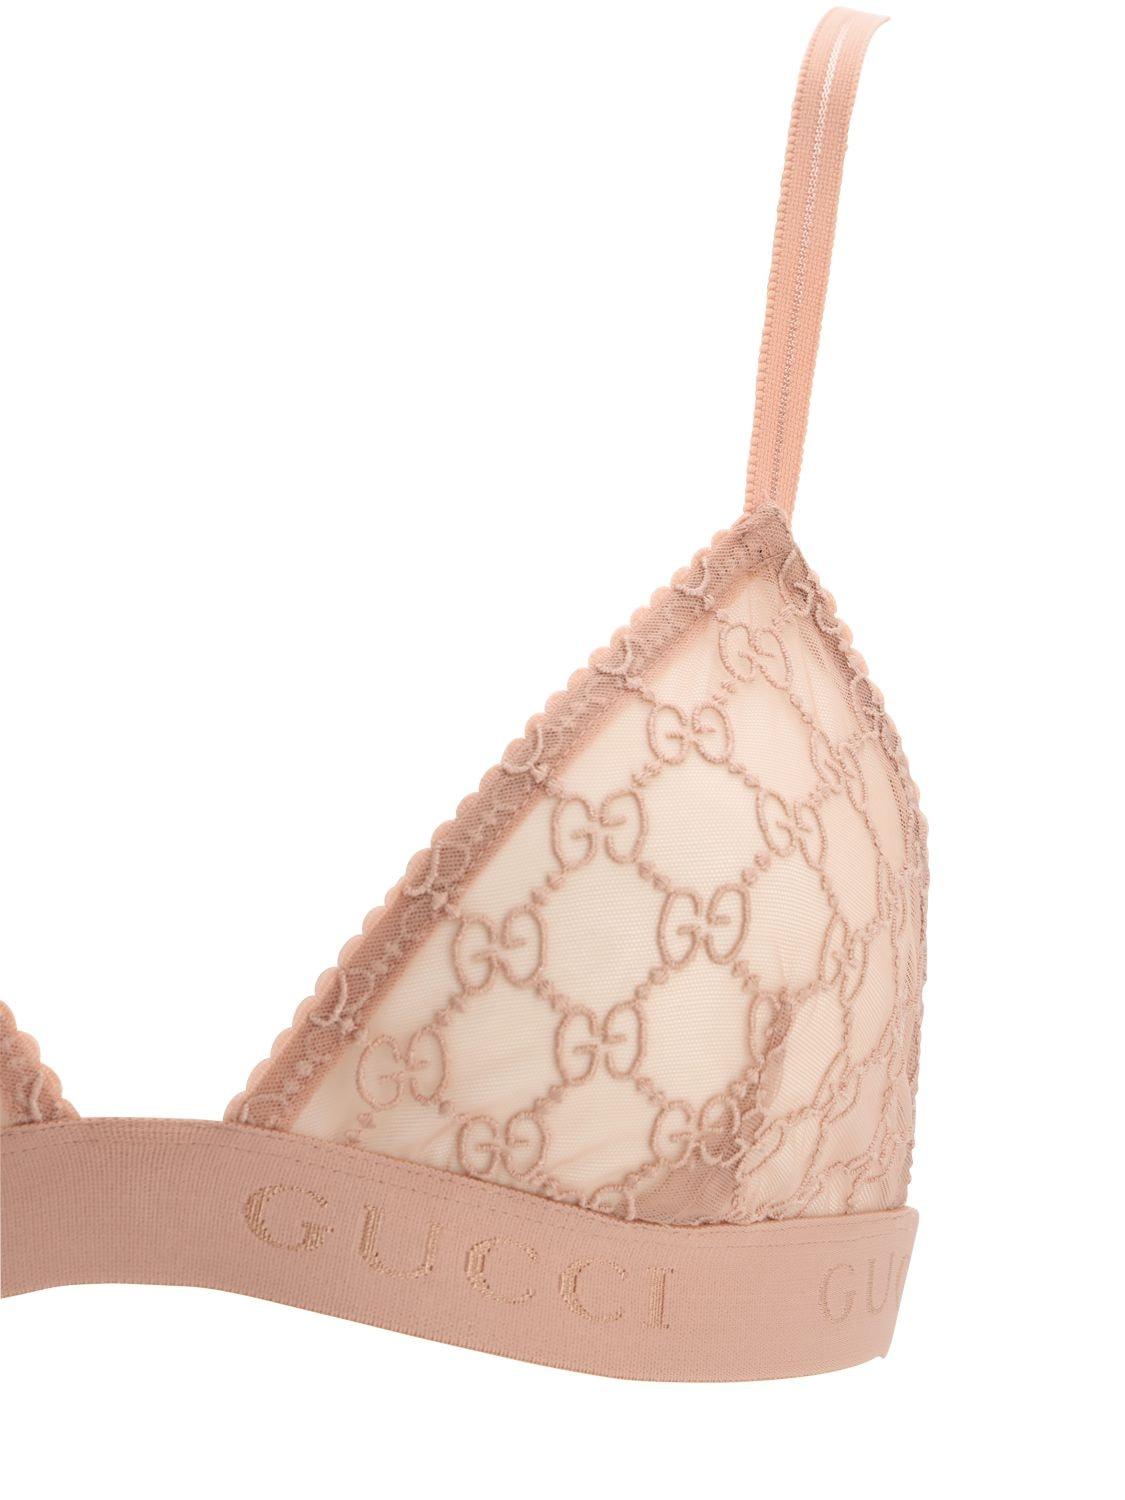 Gg Embroidered Lingerie Set In Pink